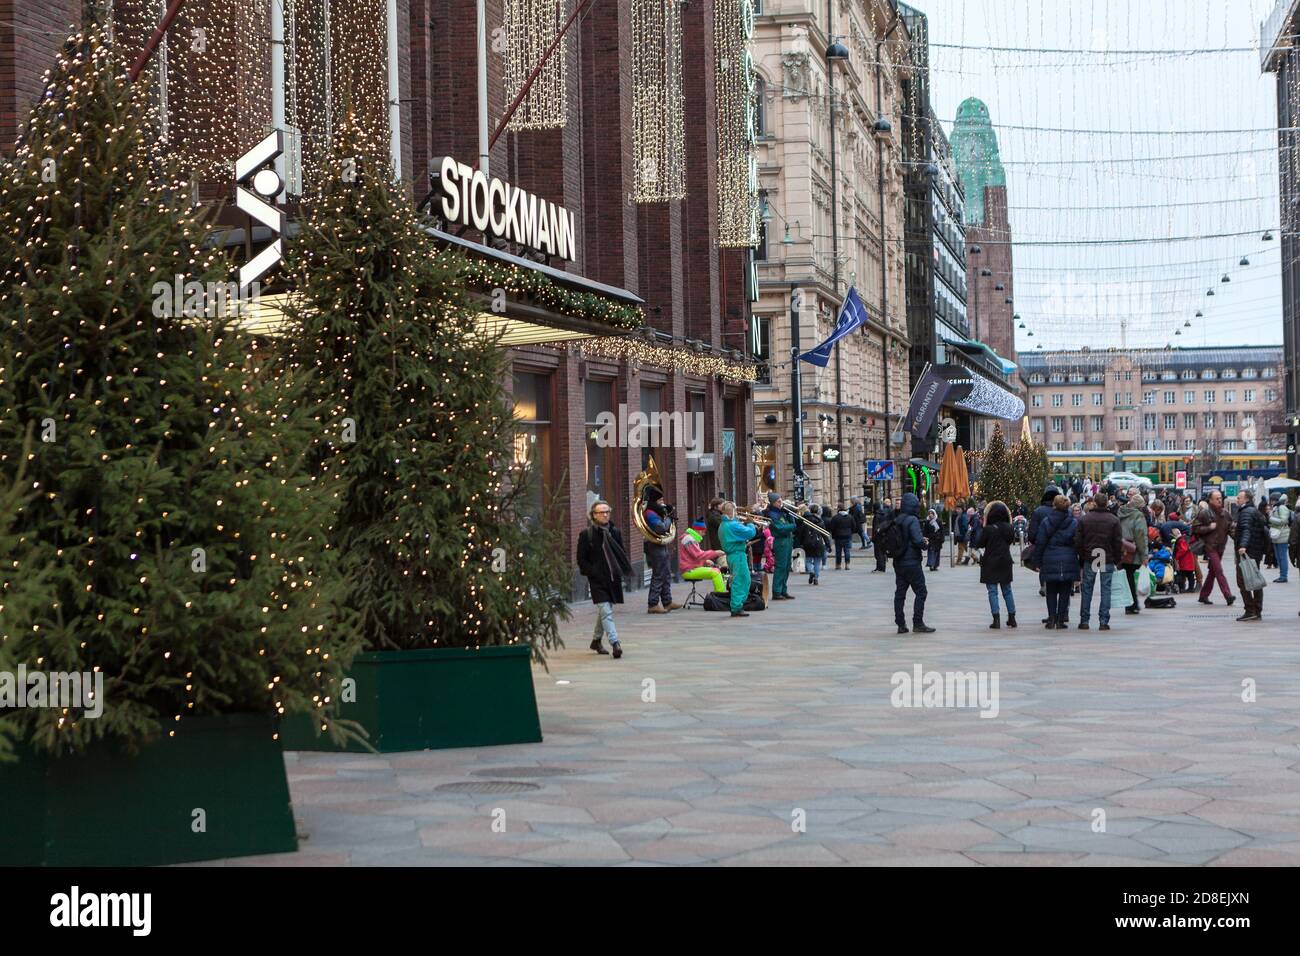 HELSINKI, FINLAND-CIRCA DEC, 2018: Street musicians play on square near the Stockmann shopping store at Christmas eve at December. The Stockmann is th Stock Photo